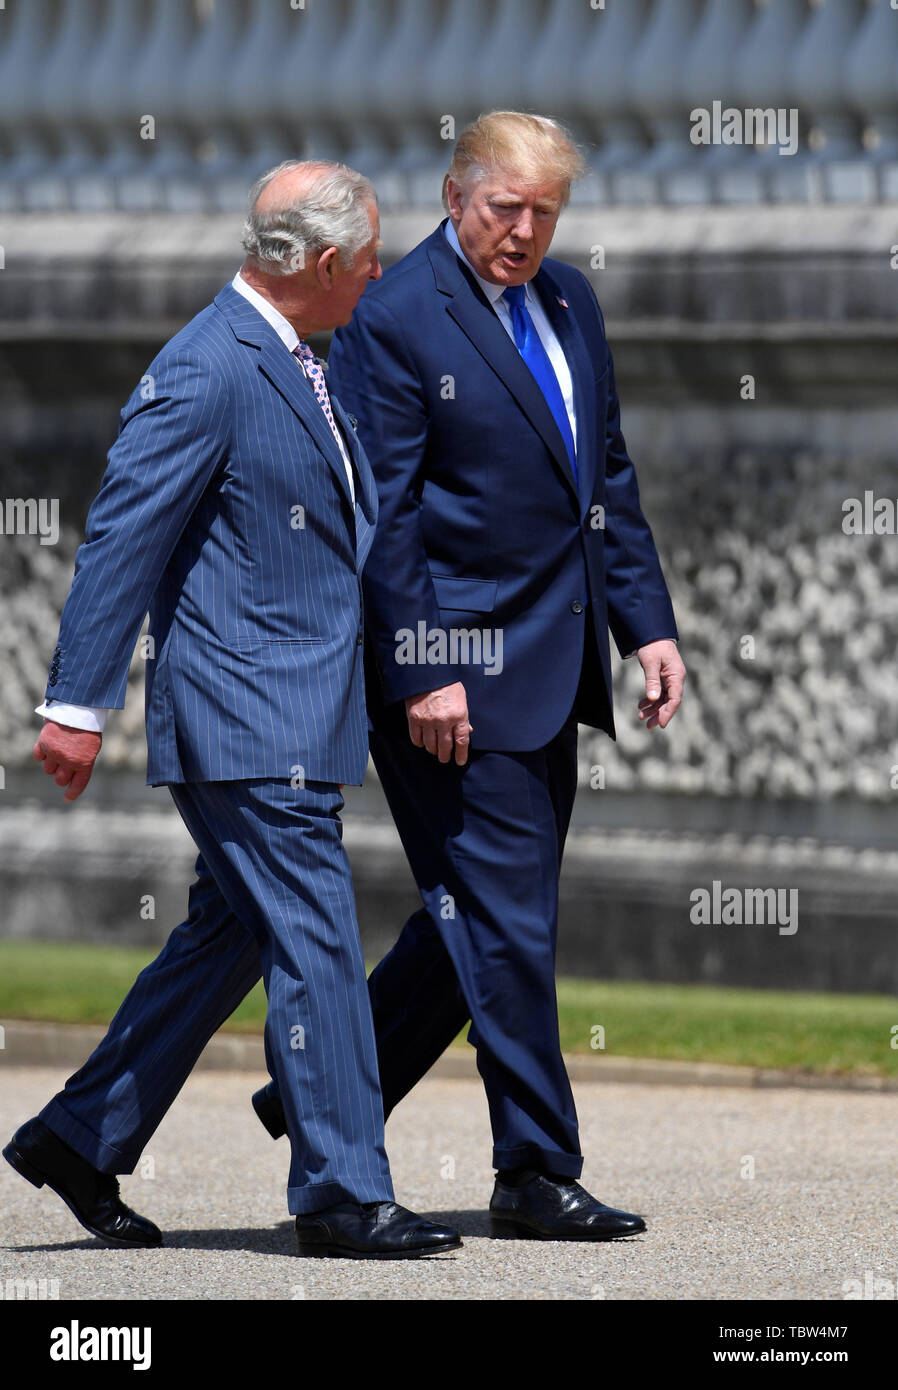 The Prince of Wales (left) meets US President Donald Trump as he arrives in Marine One at Buckingham Palace, in London on day one of his three day state visit to the UK. Stock Photo